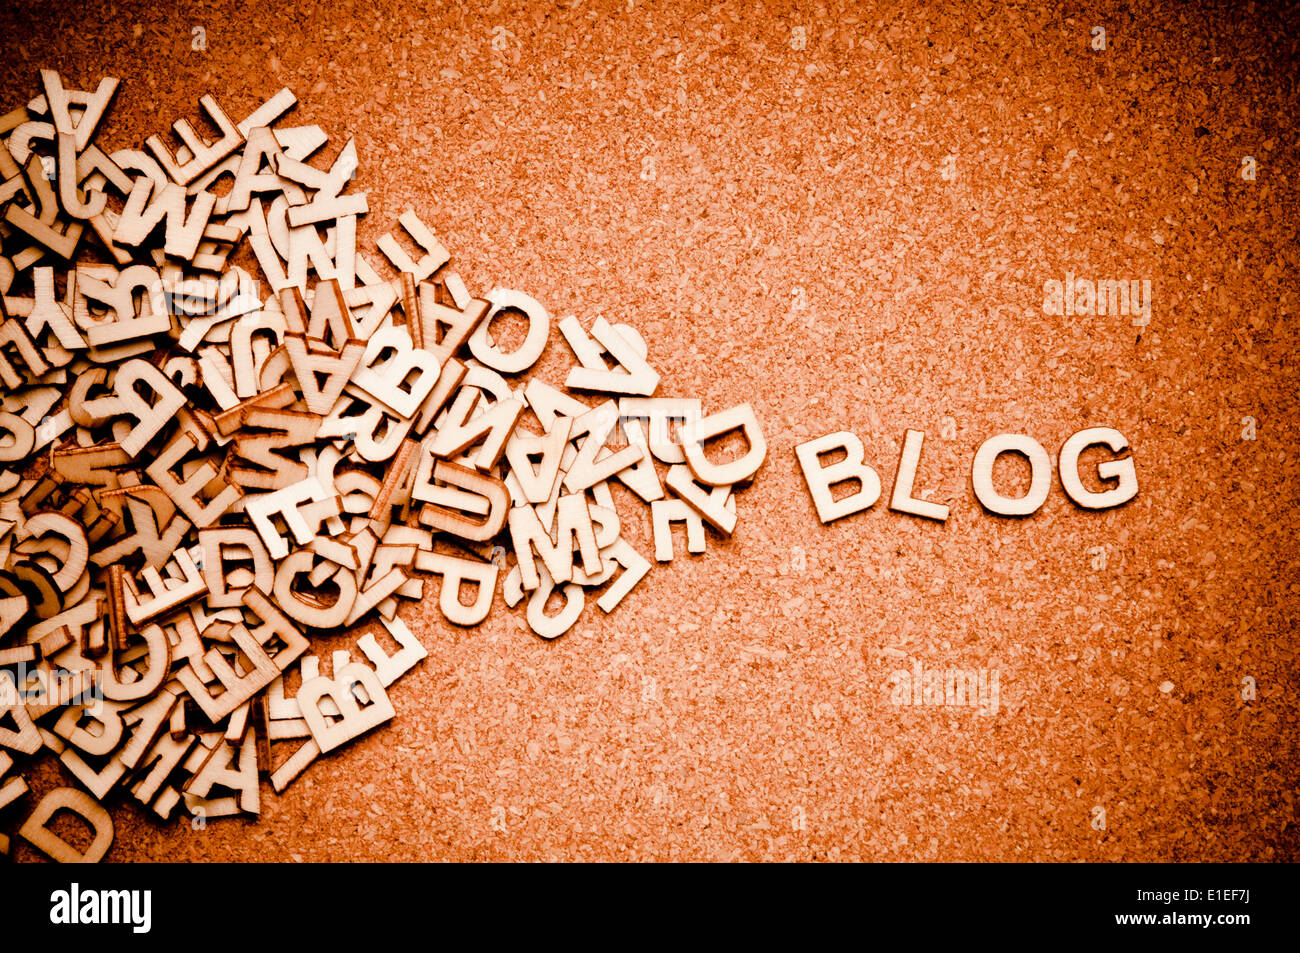 word BLOG formed from scattered wooden letters - blog concept Stock Photo